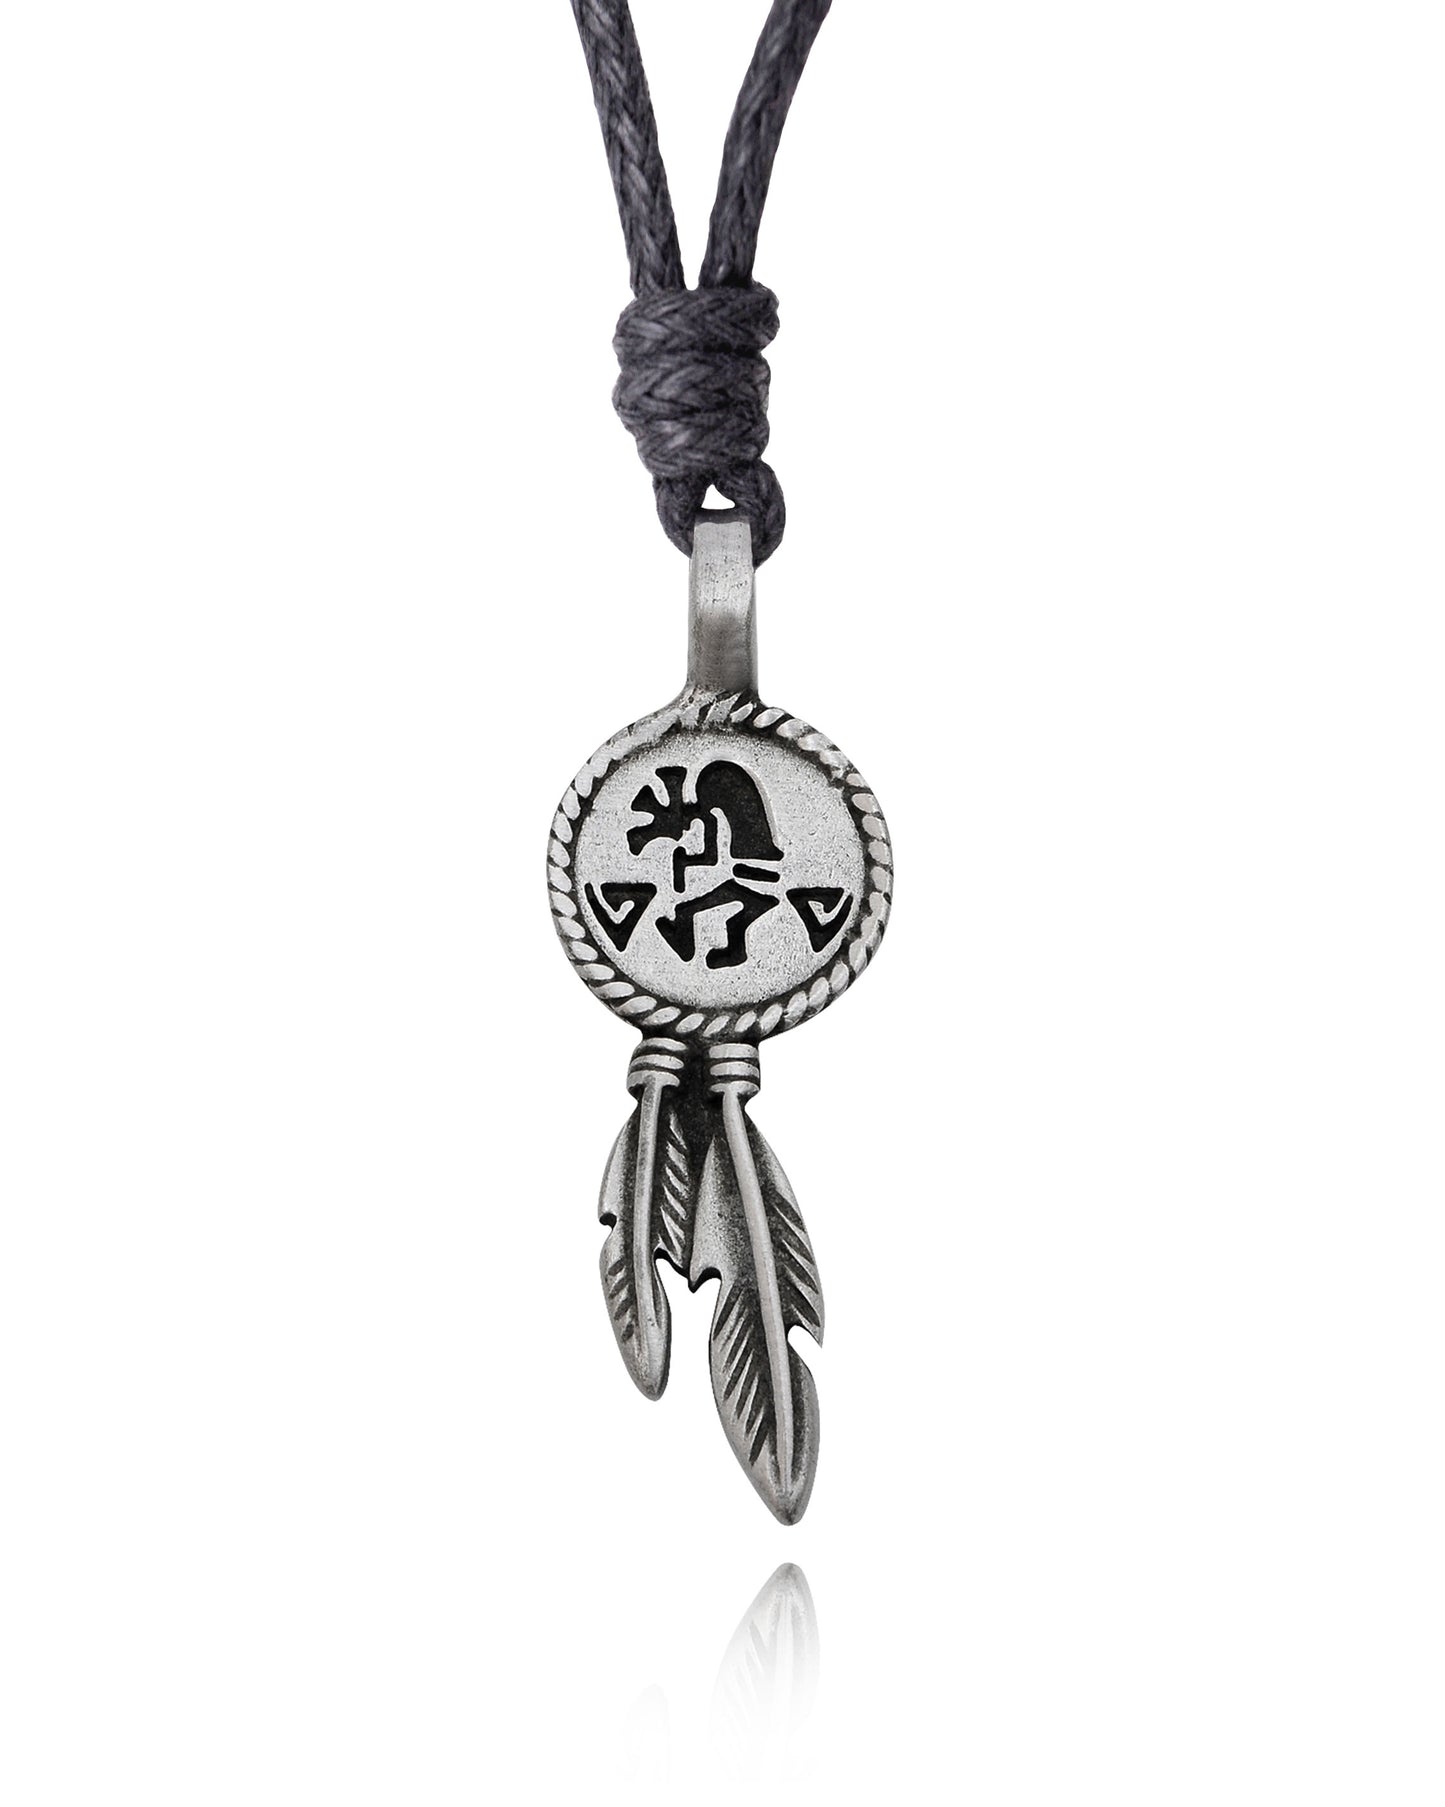 New Native American Indian Symbol Silver Pewter Necklace Pendant Jewelry